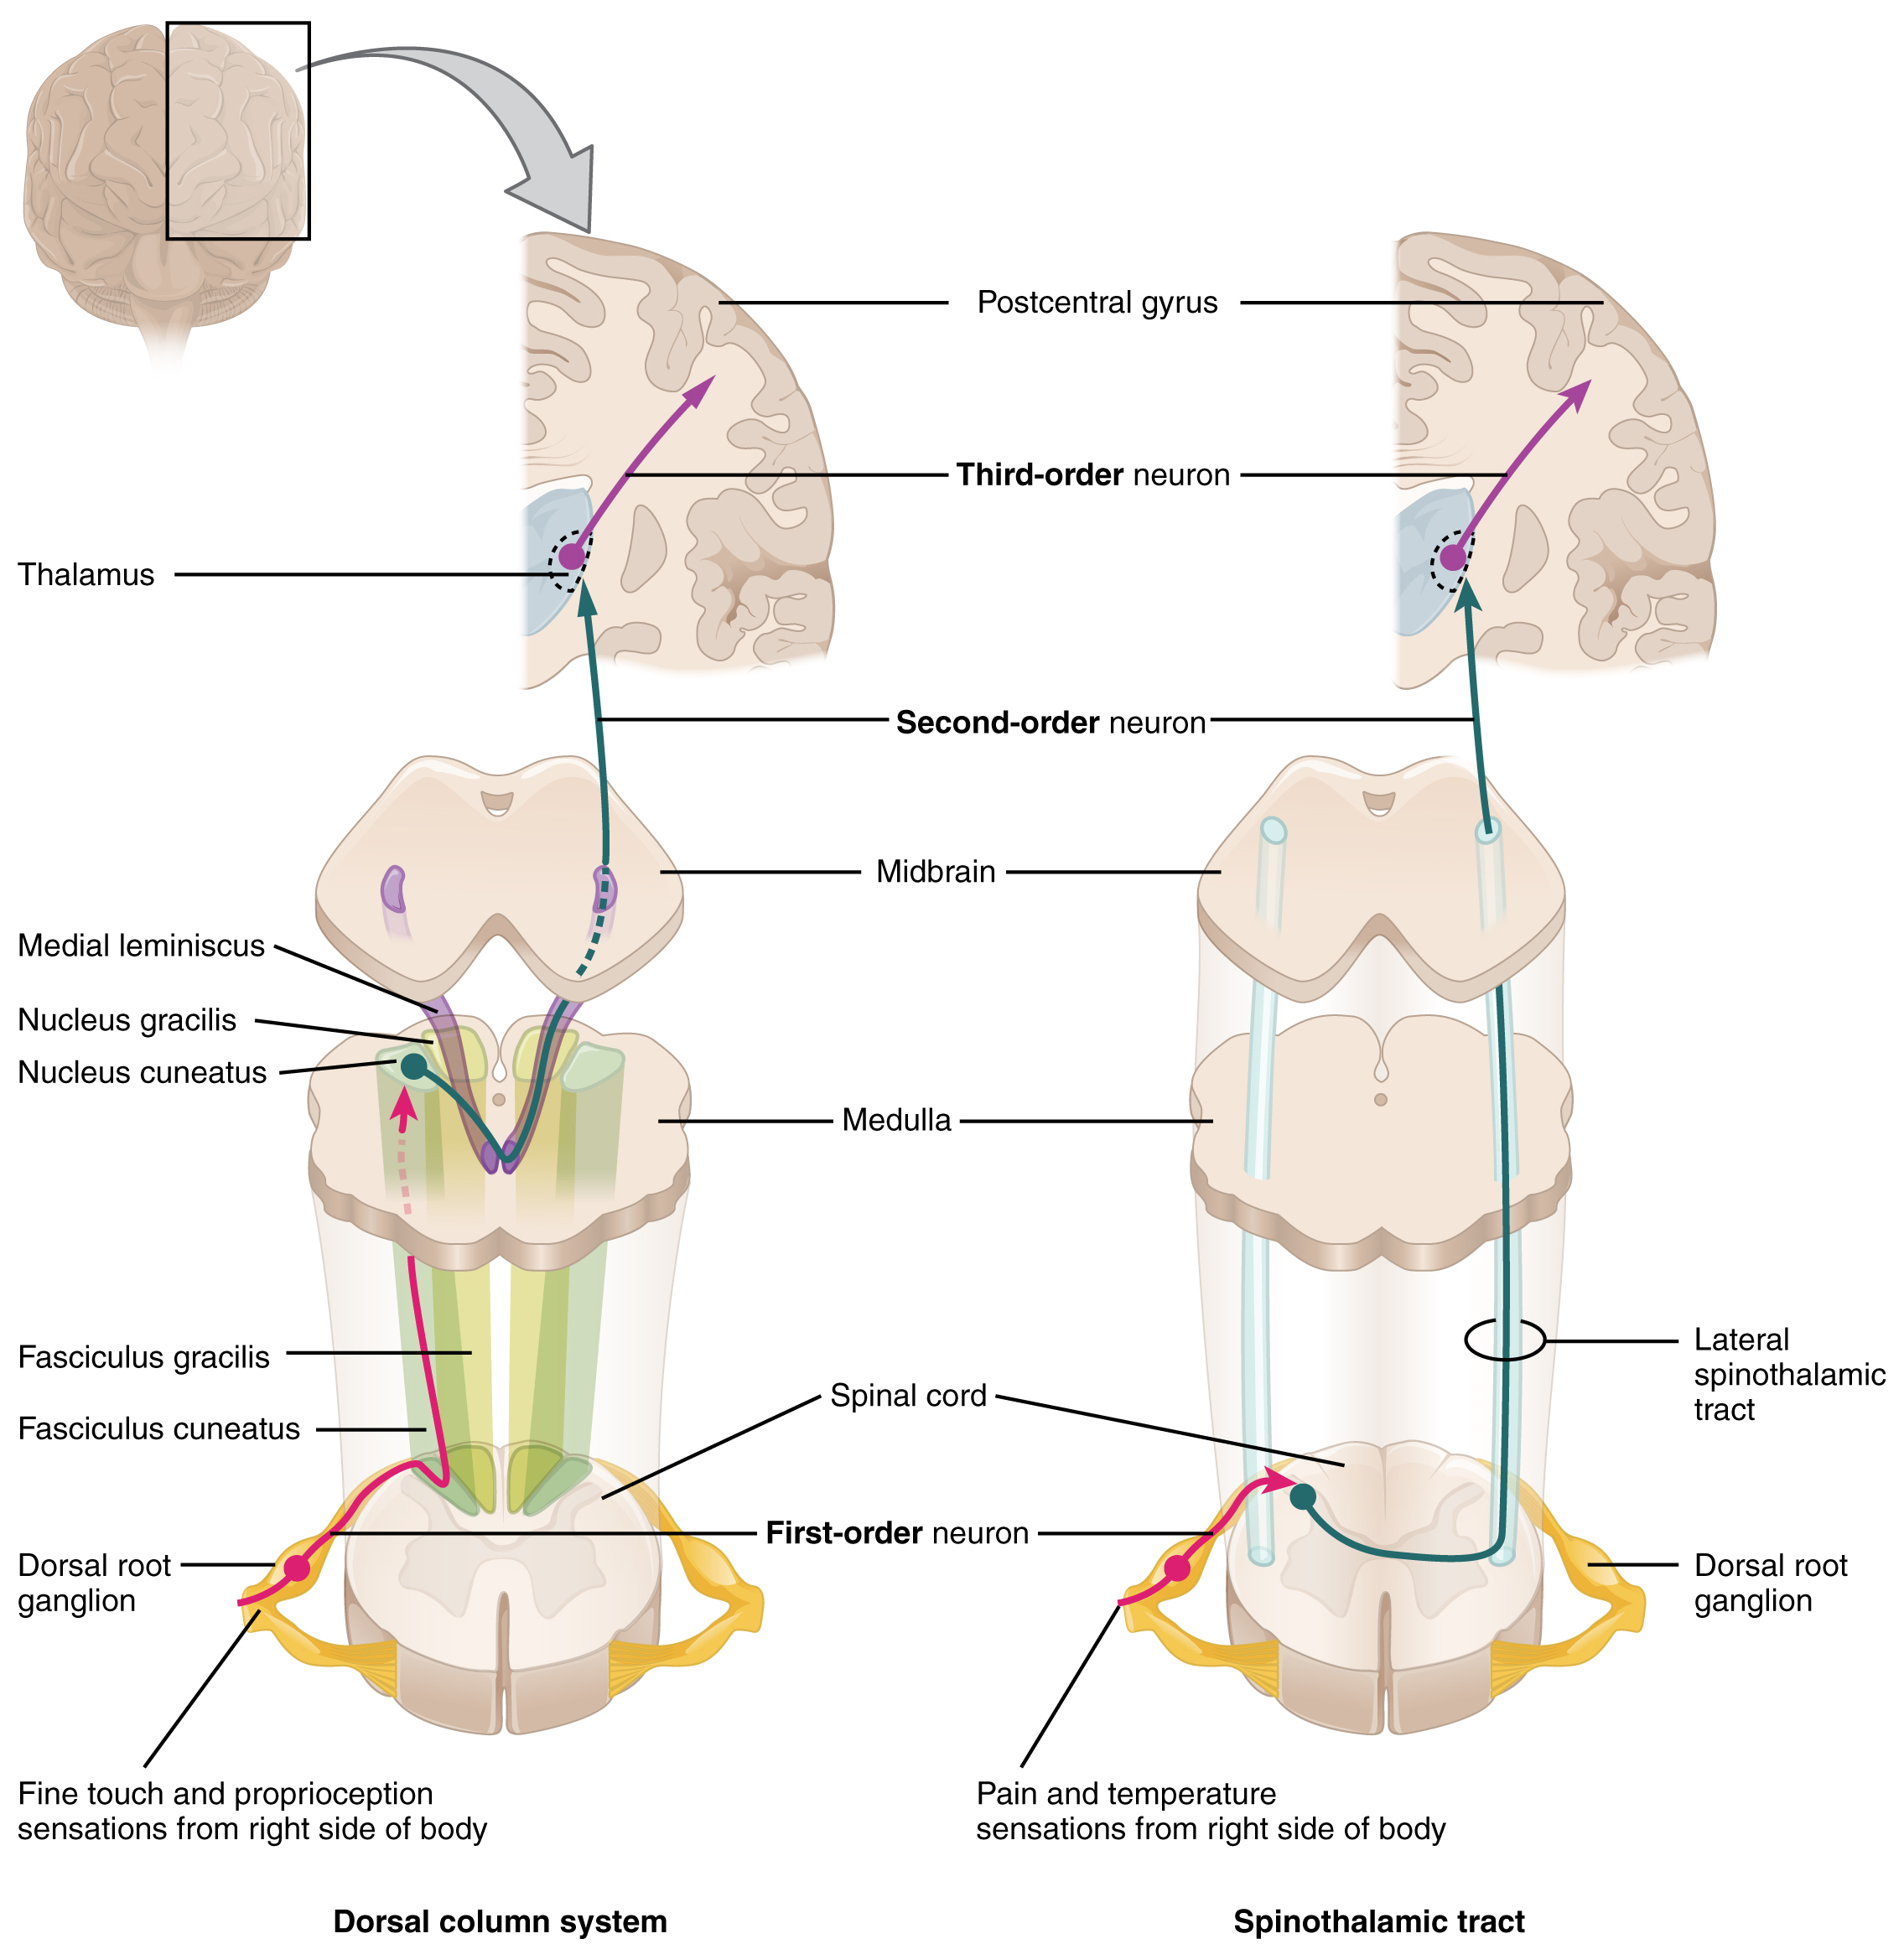 Sections of spinal cord, medulla, midbrain and brain with ascending axons of two pathways